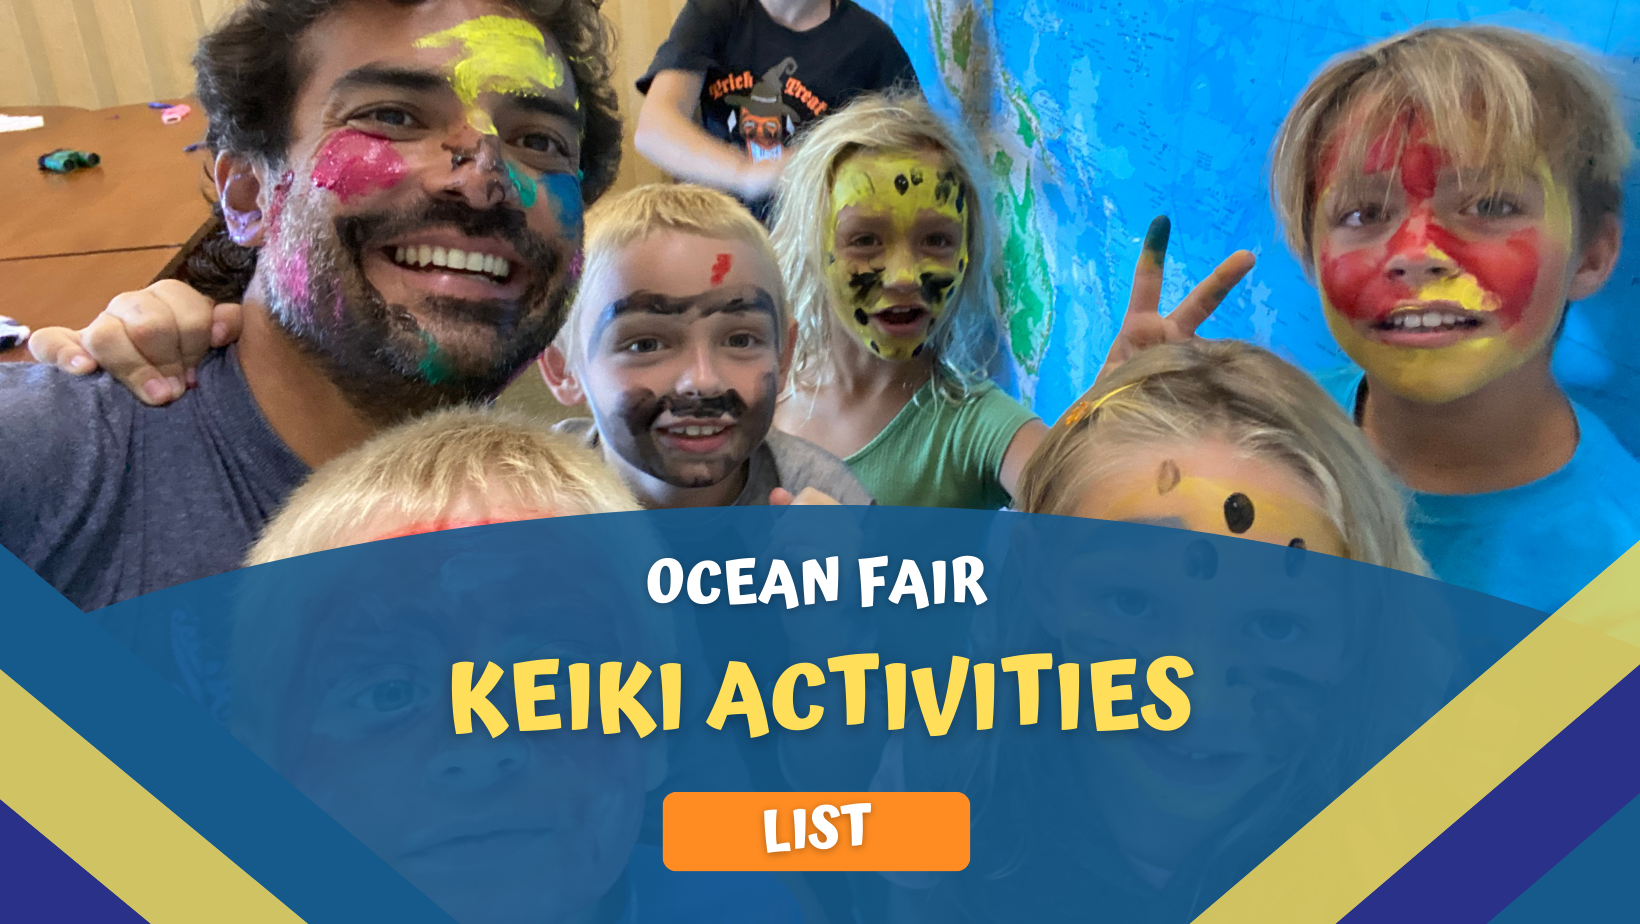 Ocean Fair: Fun Activities For Keiki That Promote Conservation And Sustainability